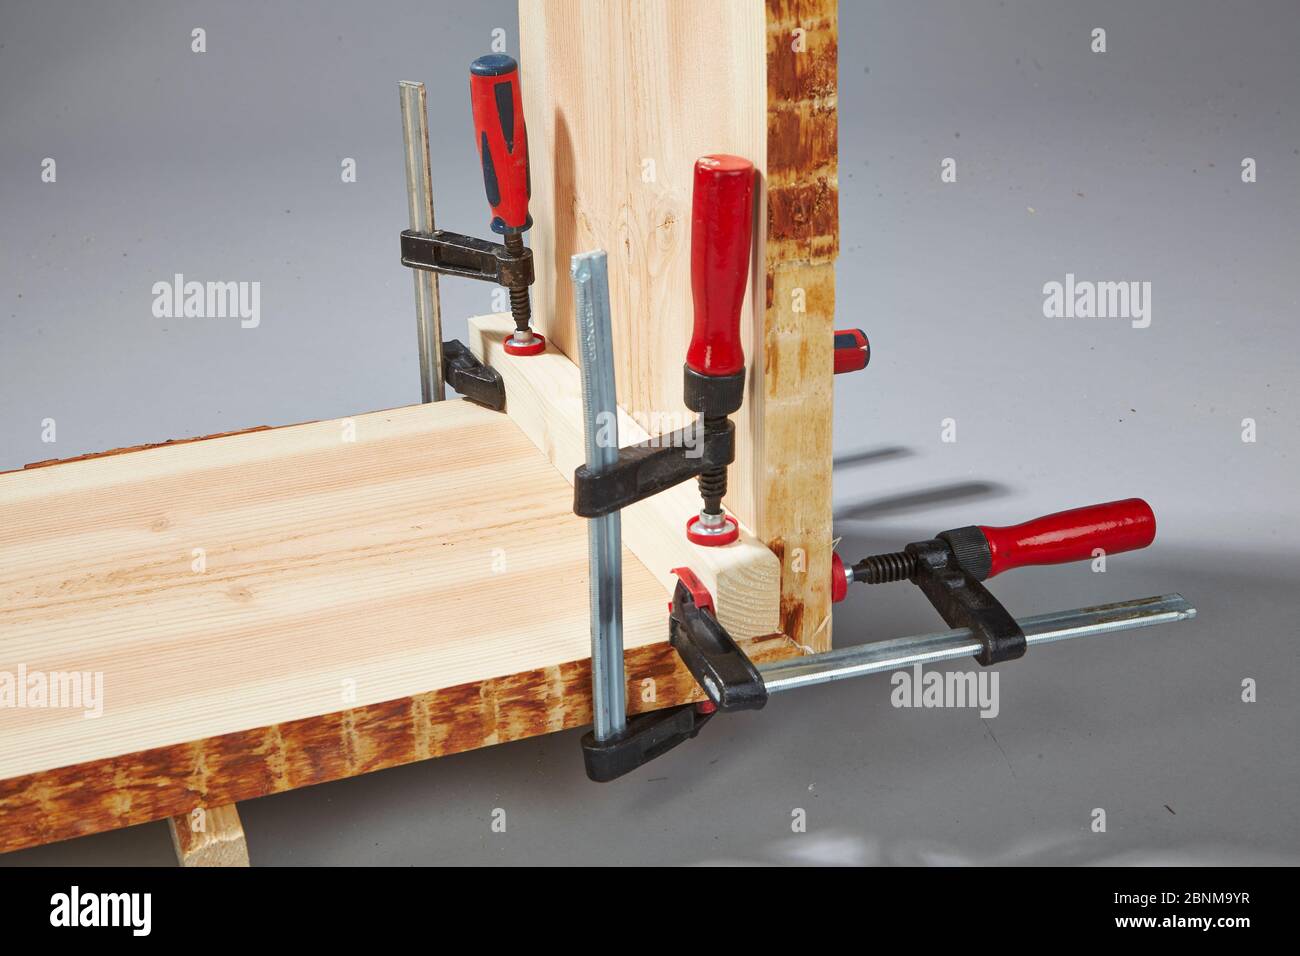 Construction of a shelf made of wood, do-it-yourself production, step-by-step, step 8 Stabilization of the fresh gluing with the help of screw clamps and an auxiliary bar that is removed after curing. Stock Photo